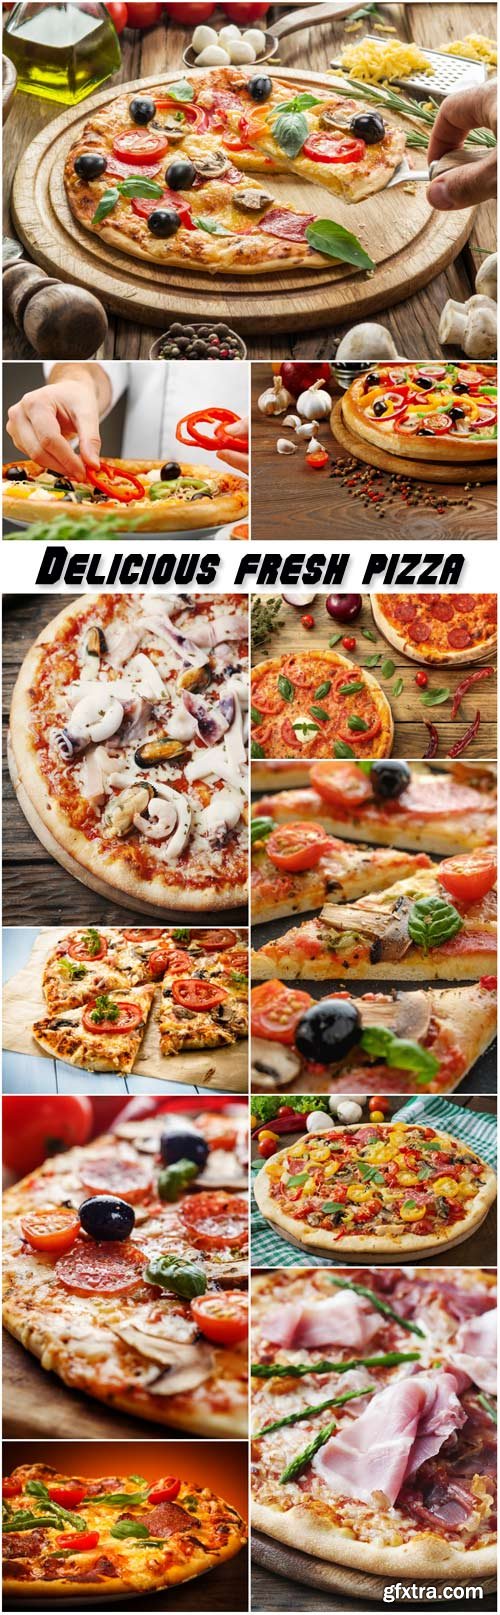 Delicious fresh pizza with mushrooms, pepperoni and seafood